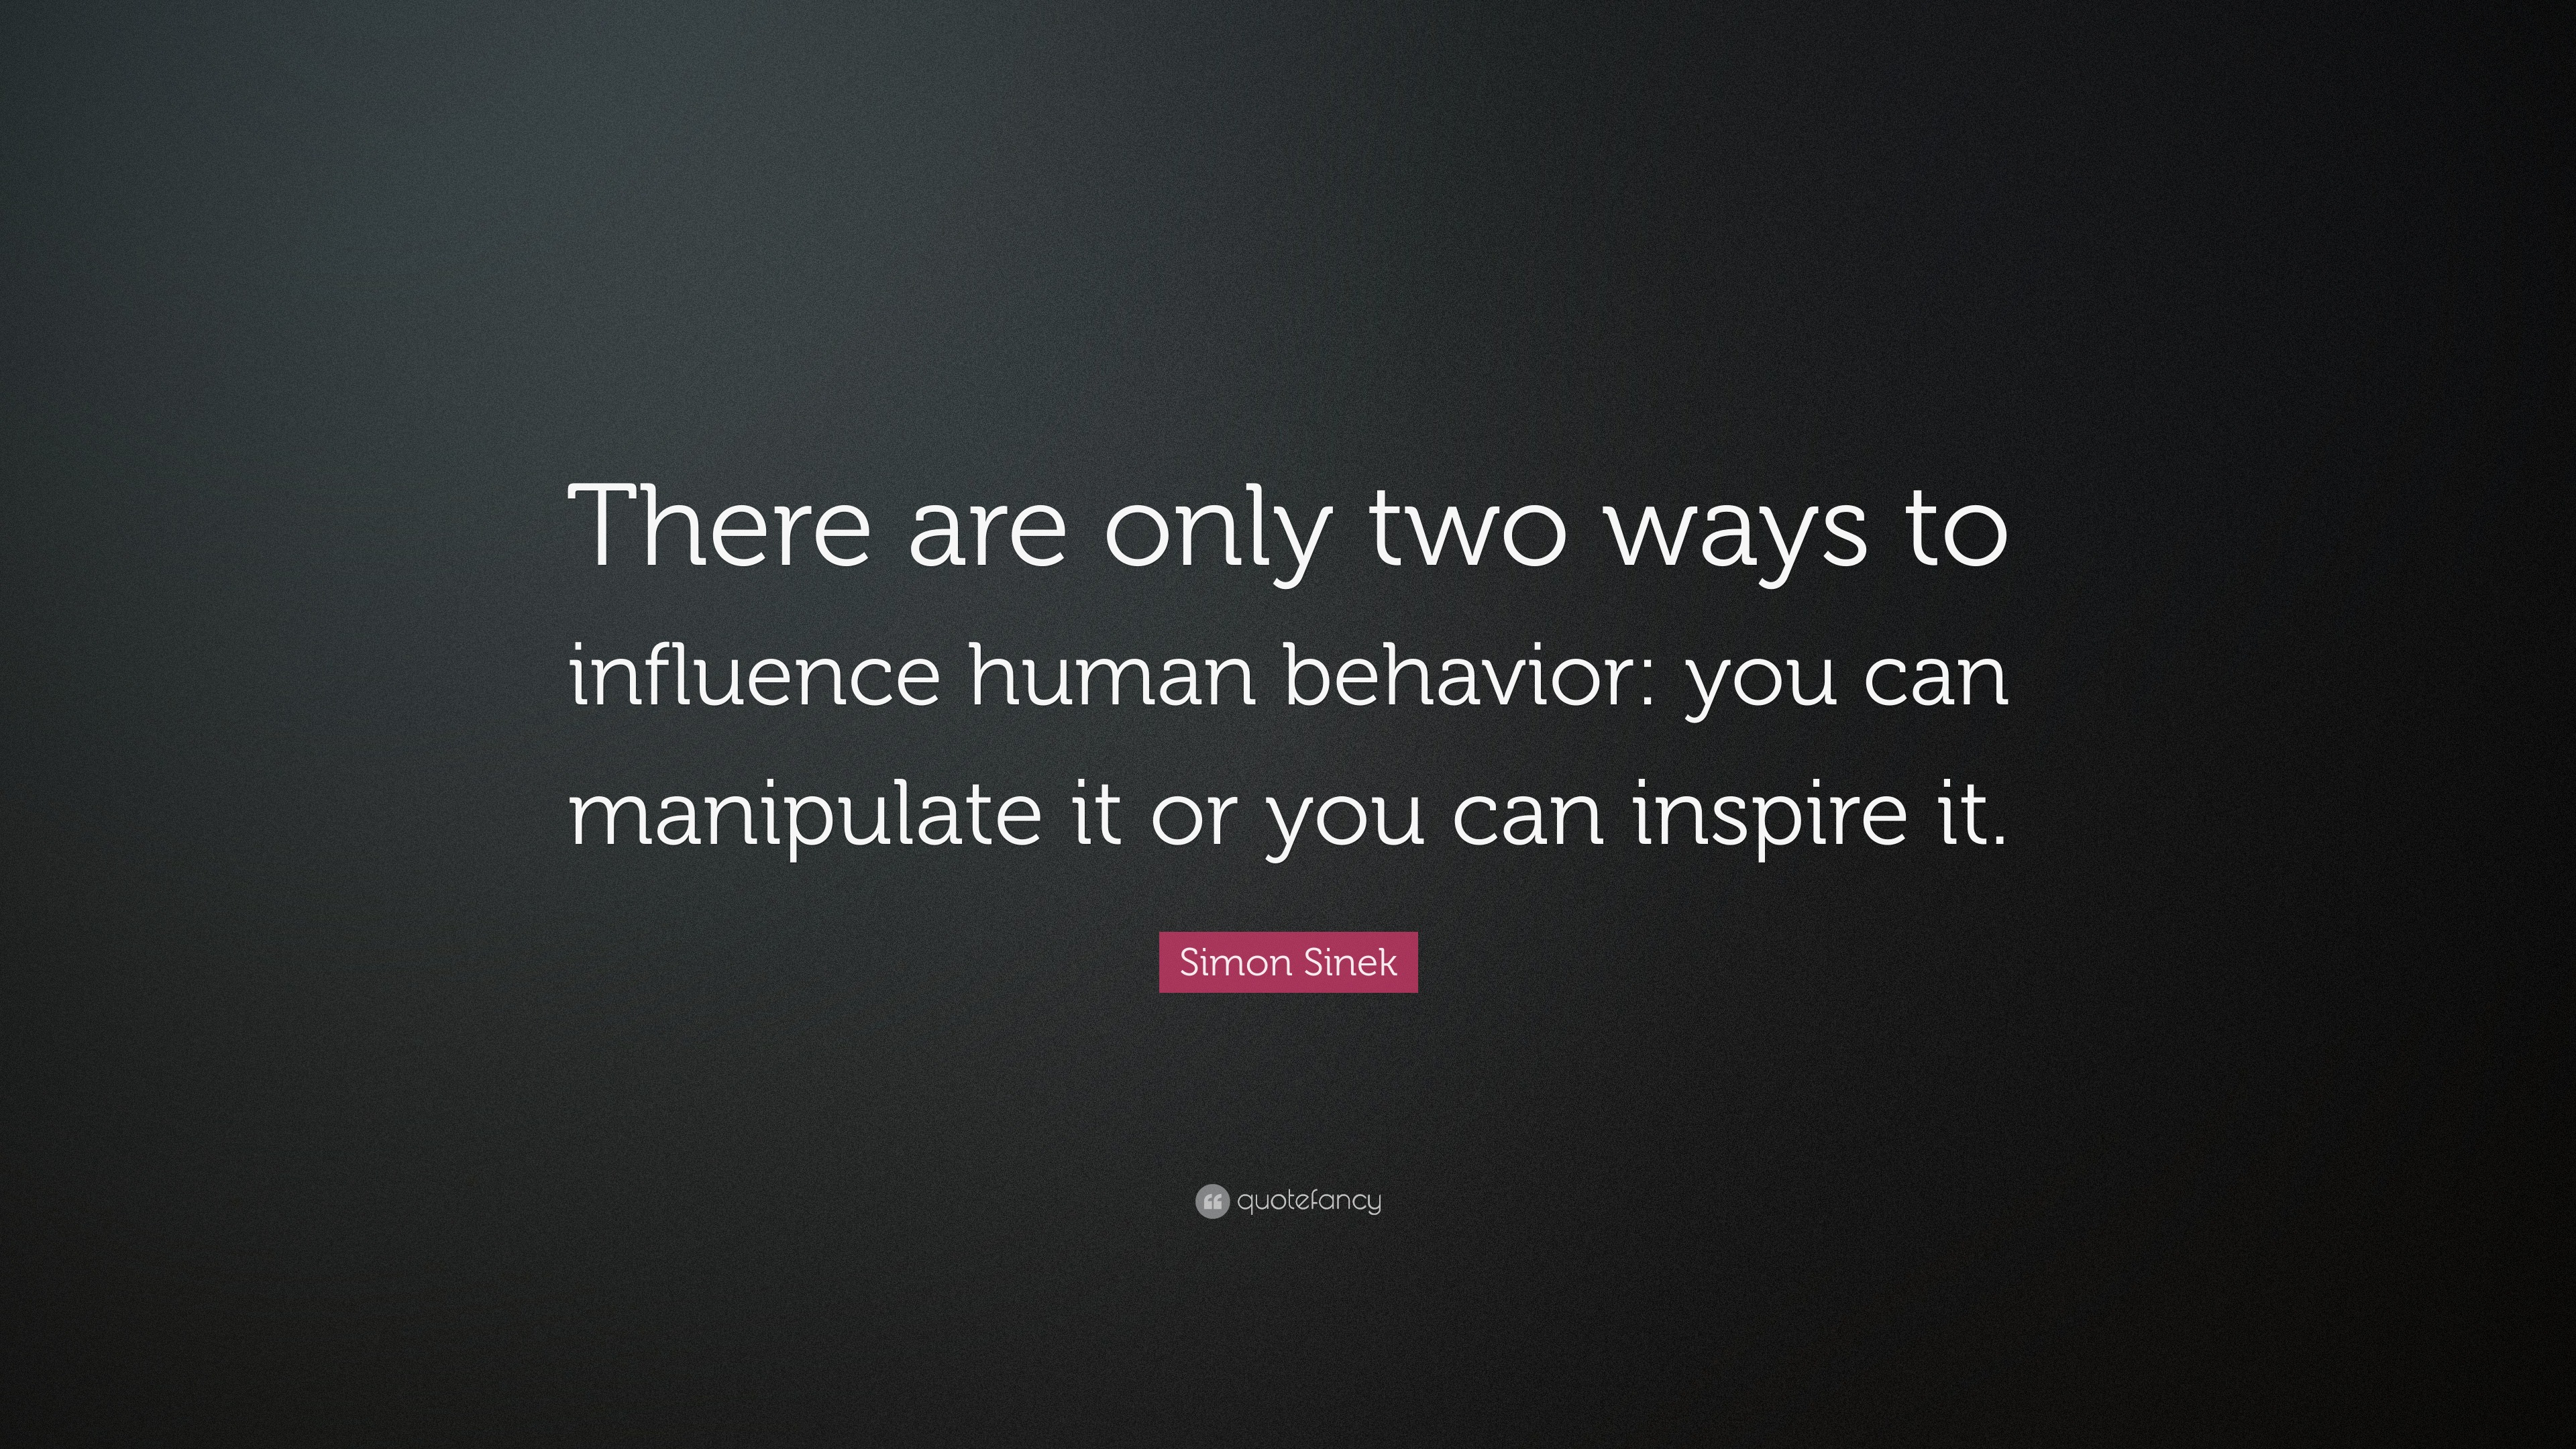 Simon Sinek Quote: “There are only two ways to influence human behavior ...